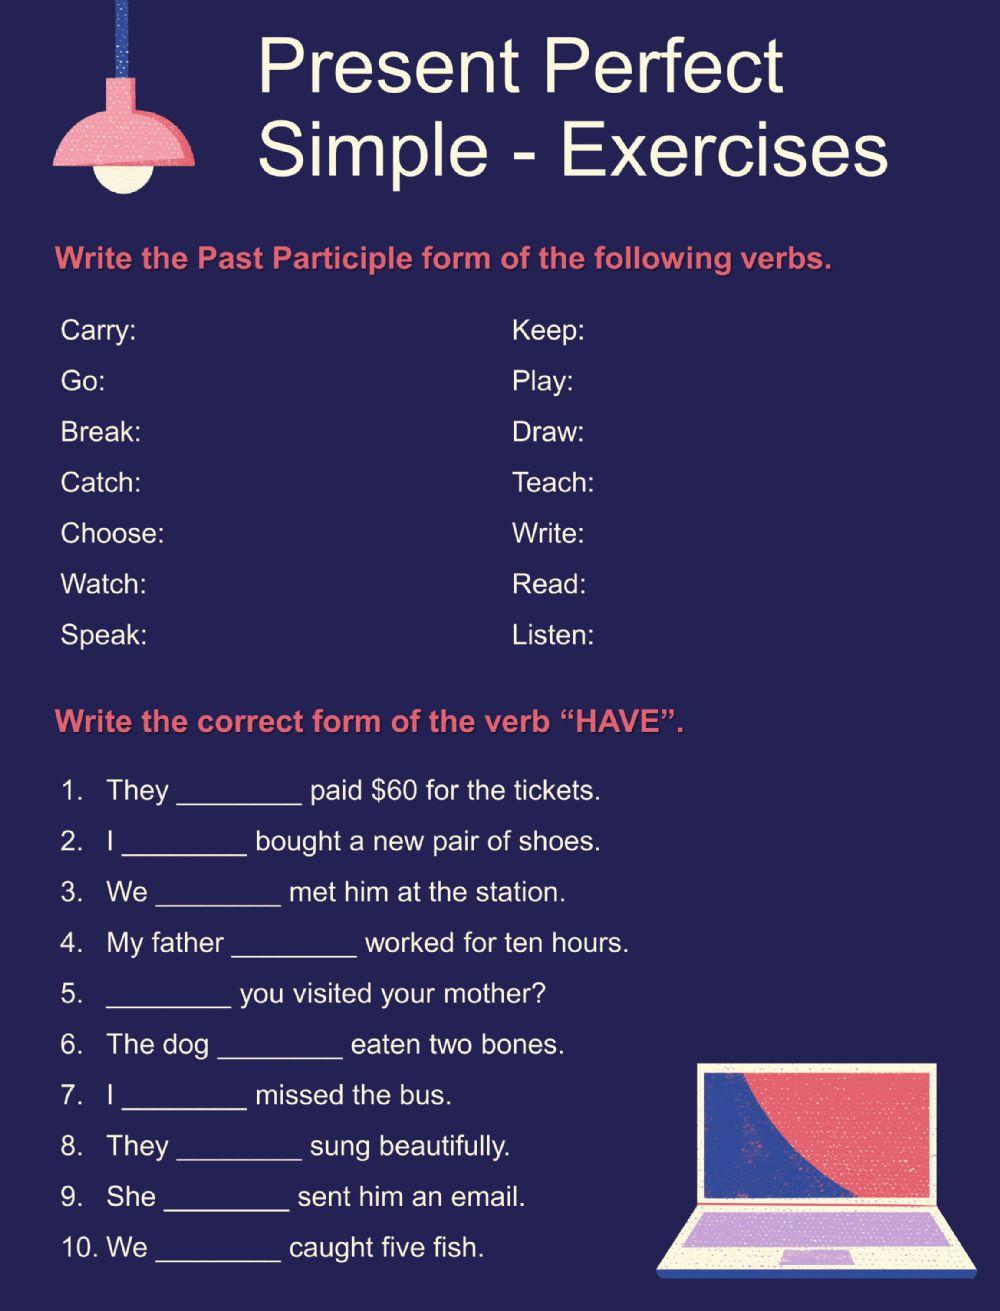 PRESENT PERFECT SIMPLE